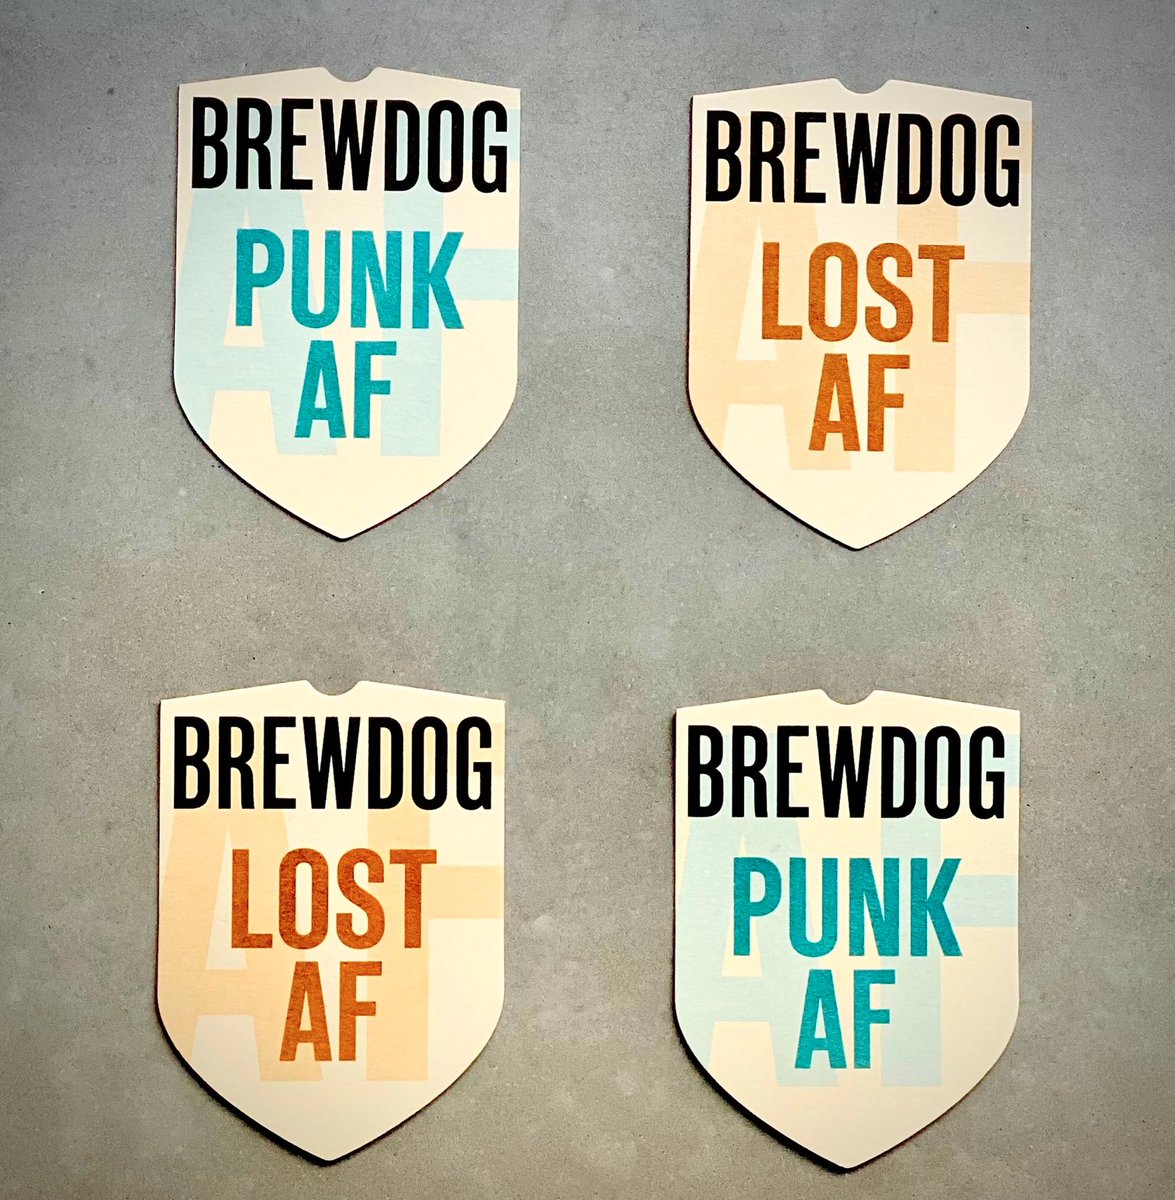 Dry January?🍻 Why not come on down and have UNLIMITED AF Refills!🤩 Whether you fancy Punk AF, or Lost AF, come on down and have your fill!😁 #brewdogbradford #bradfordbar #freeaf #dryjanuary